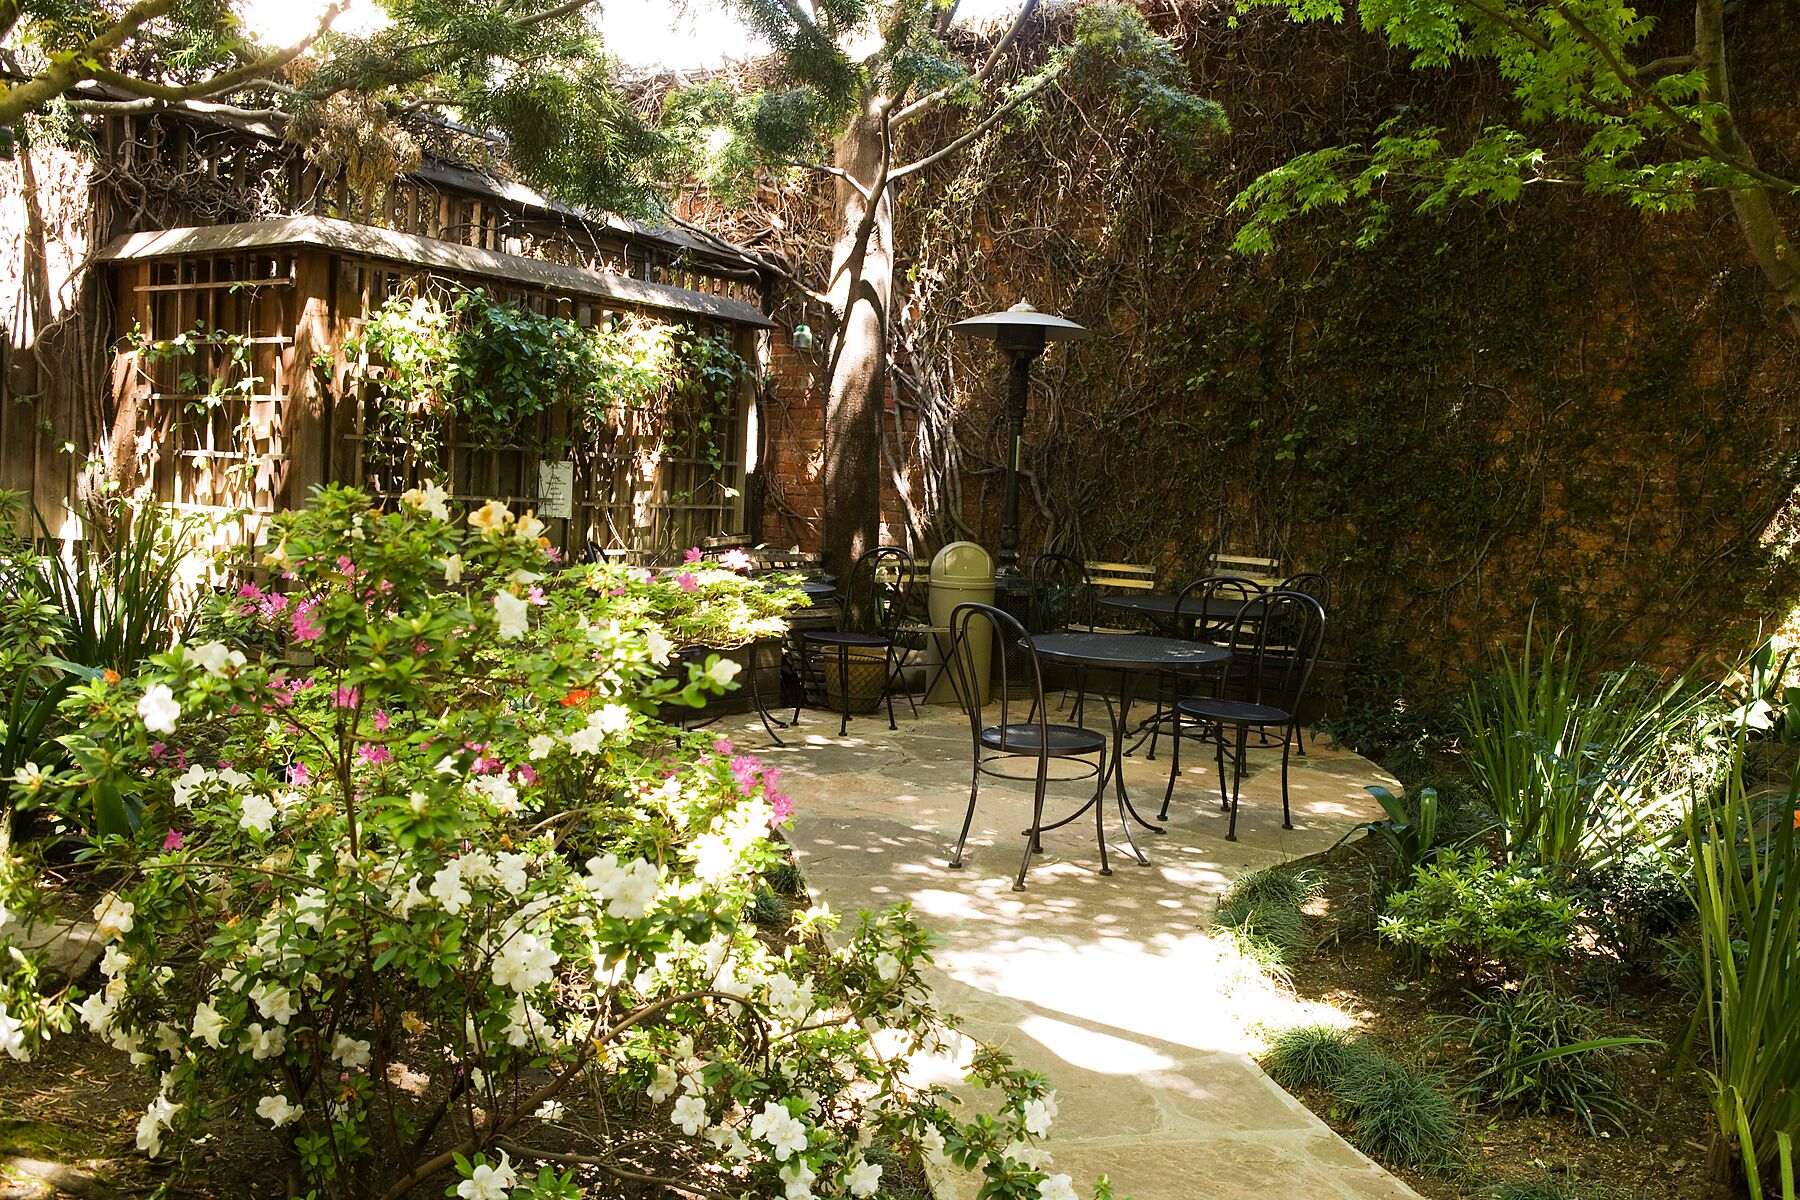 The dreamy patio behind Arlequin.